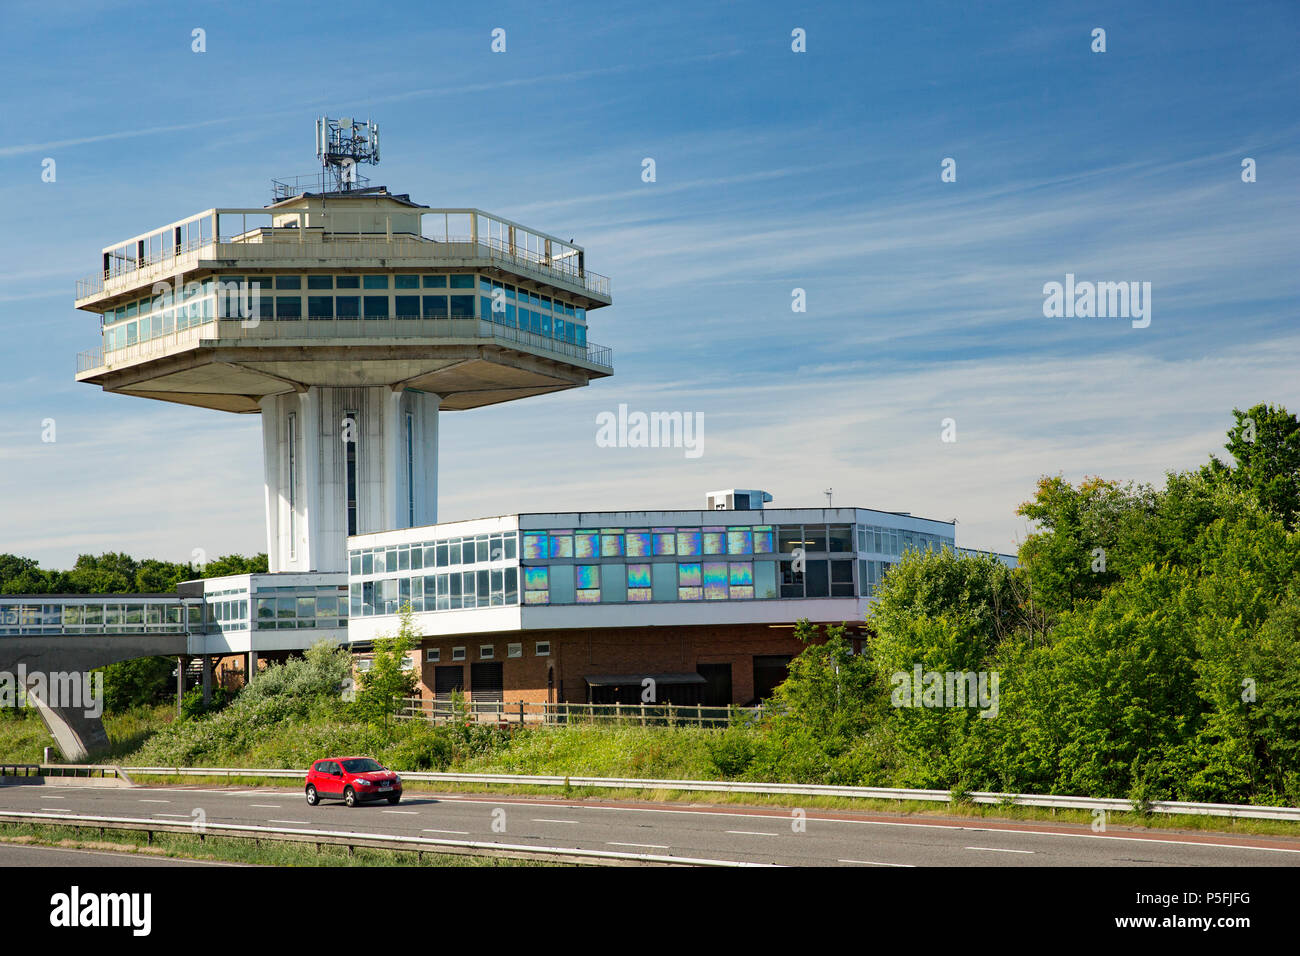 The Lancaster Forton services, now known as Lancaster Service Area, on the northbound M6 between junctions 32 and 33. The service area was opened in 1 Stock Photo